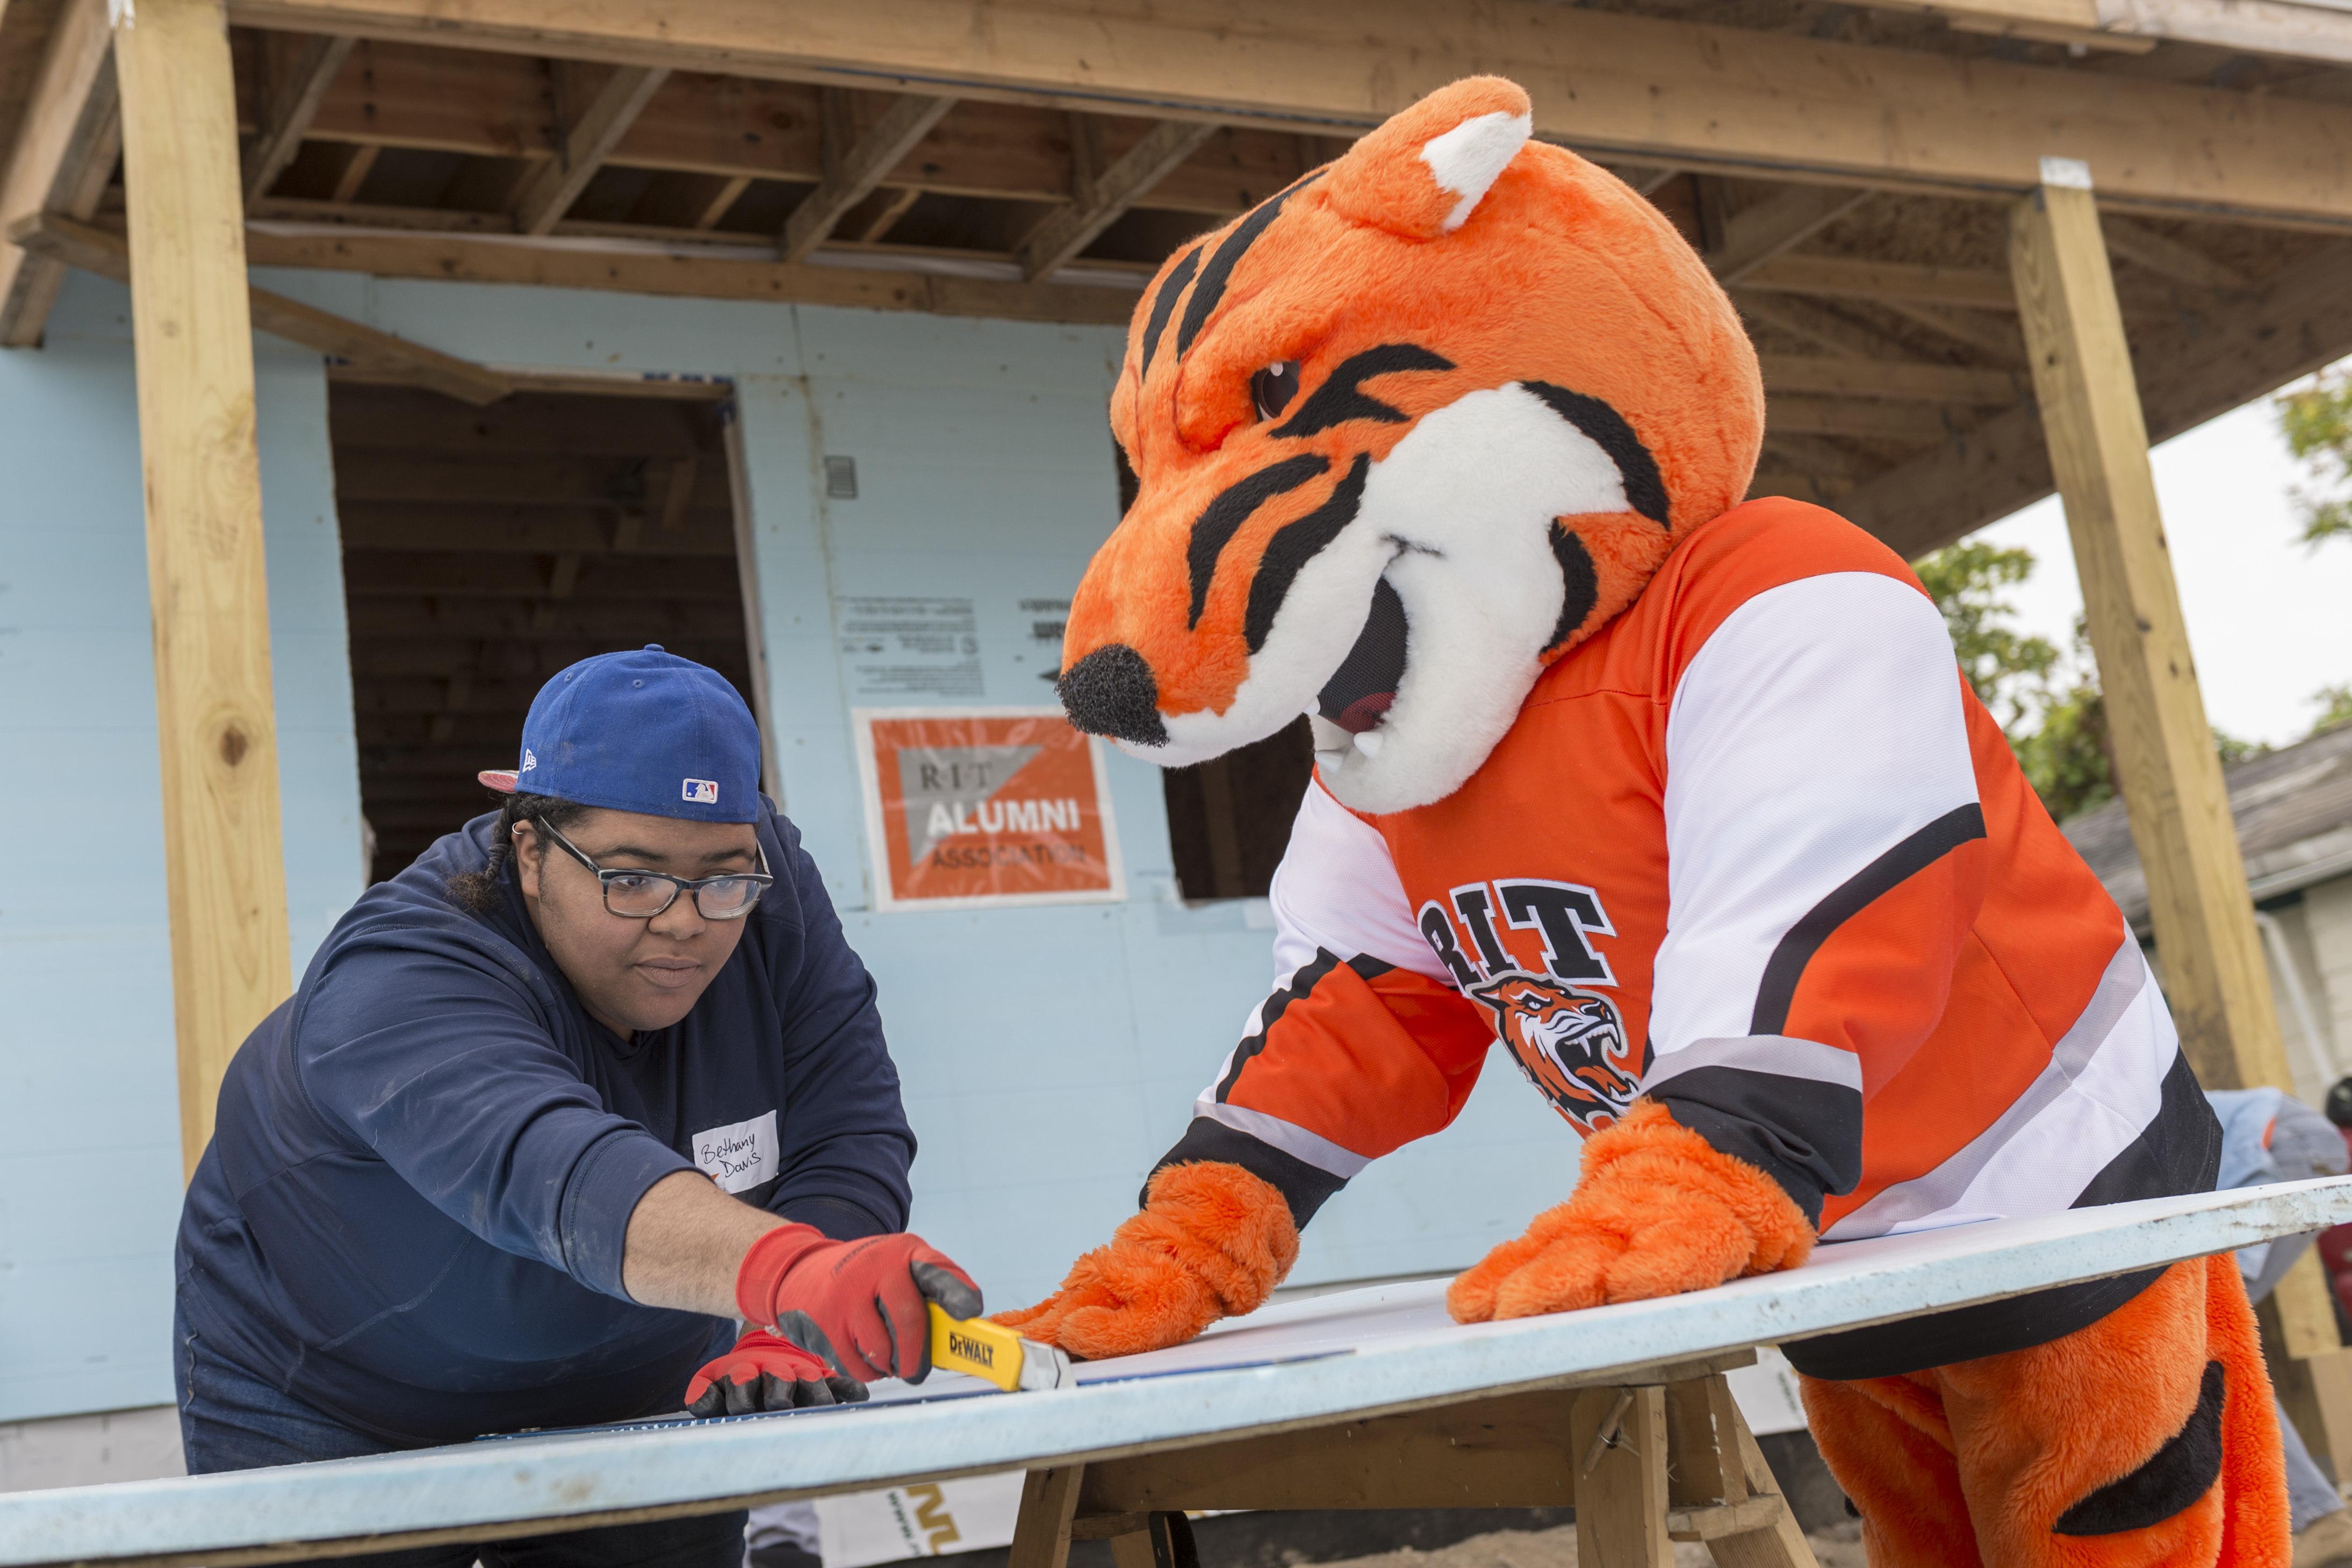 RIT mascot Ritchie working with a person